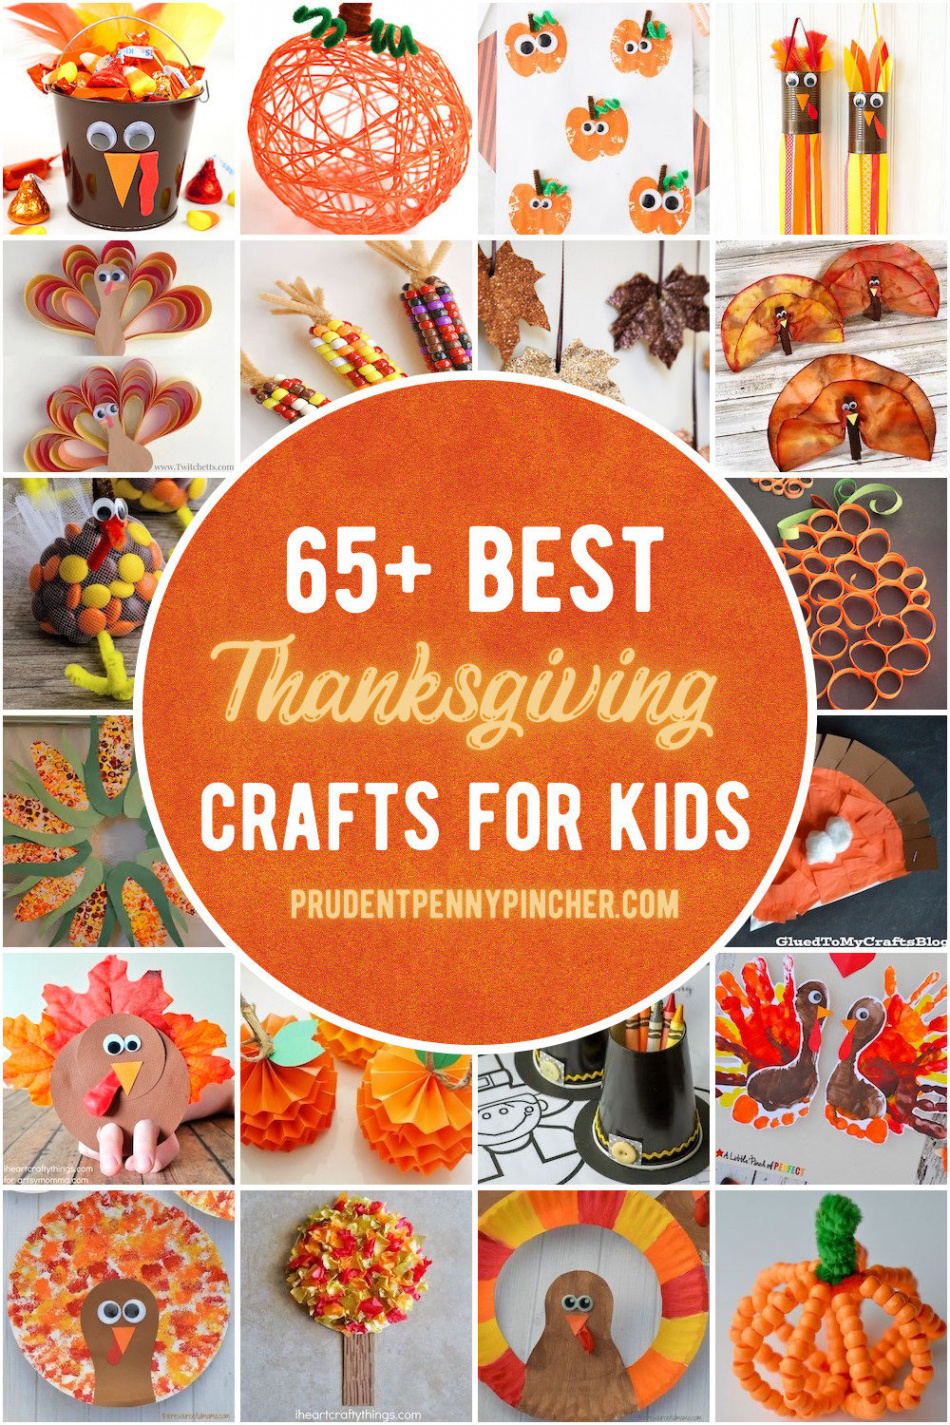 Best Thanksgiving Crafts for Kids - Prudent Penny Pincher